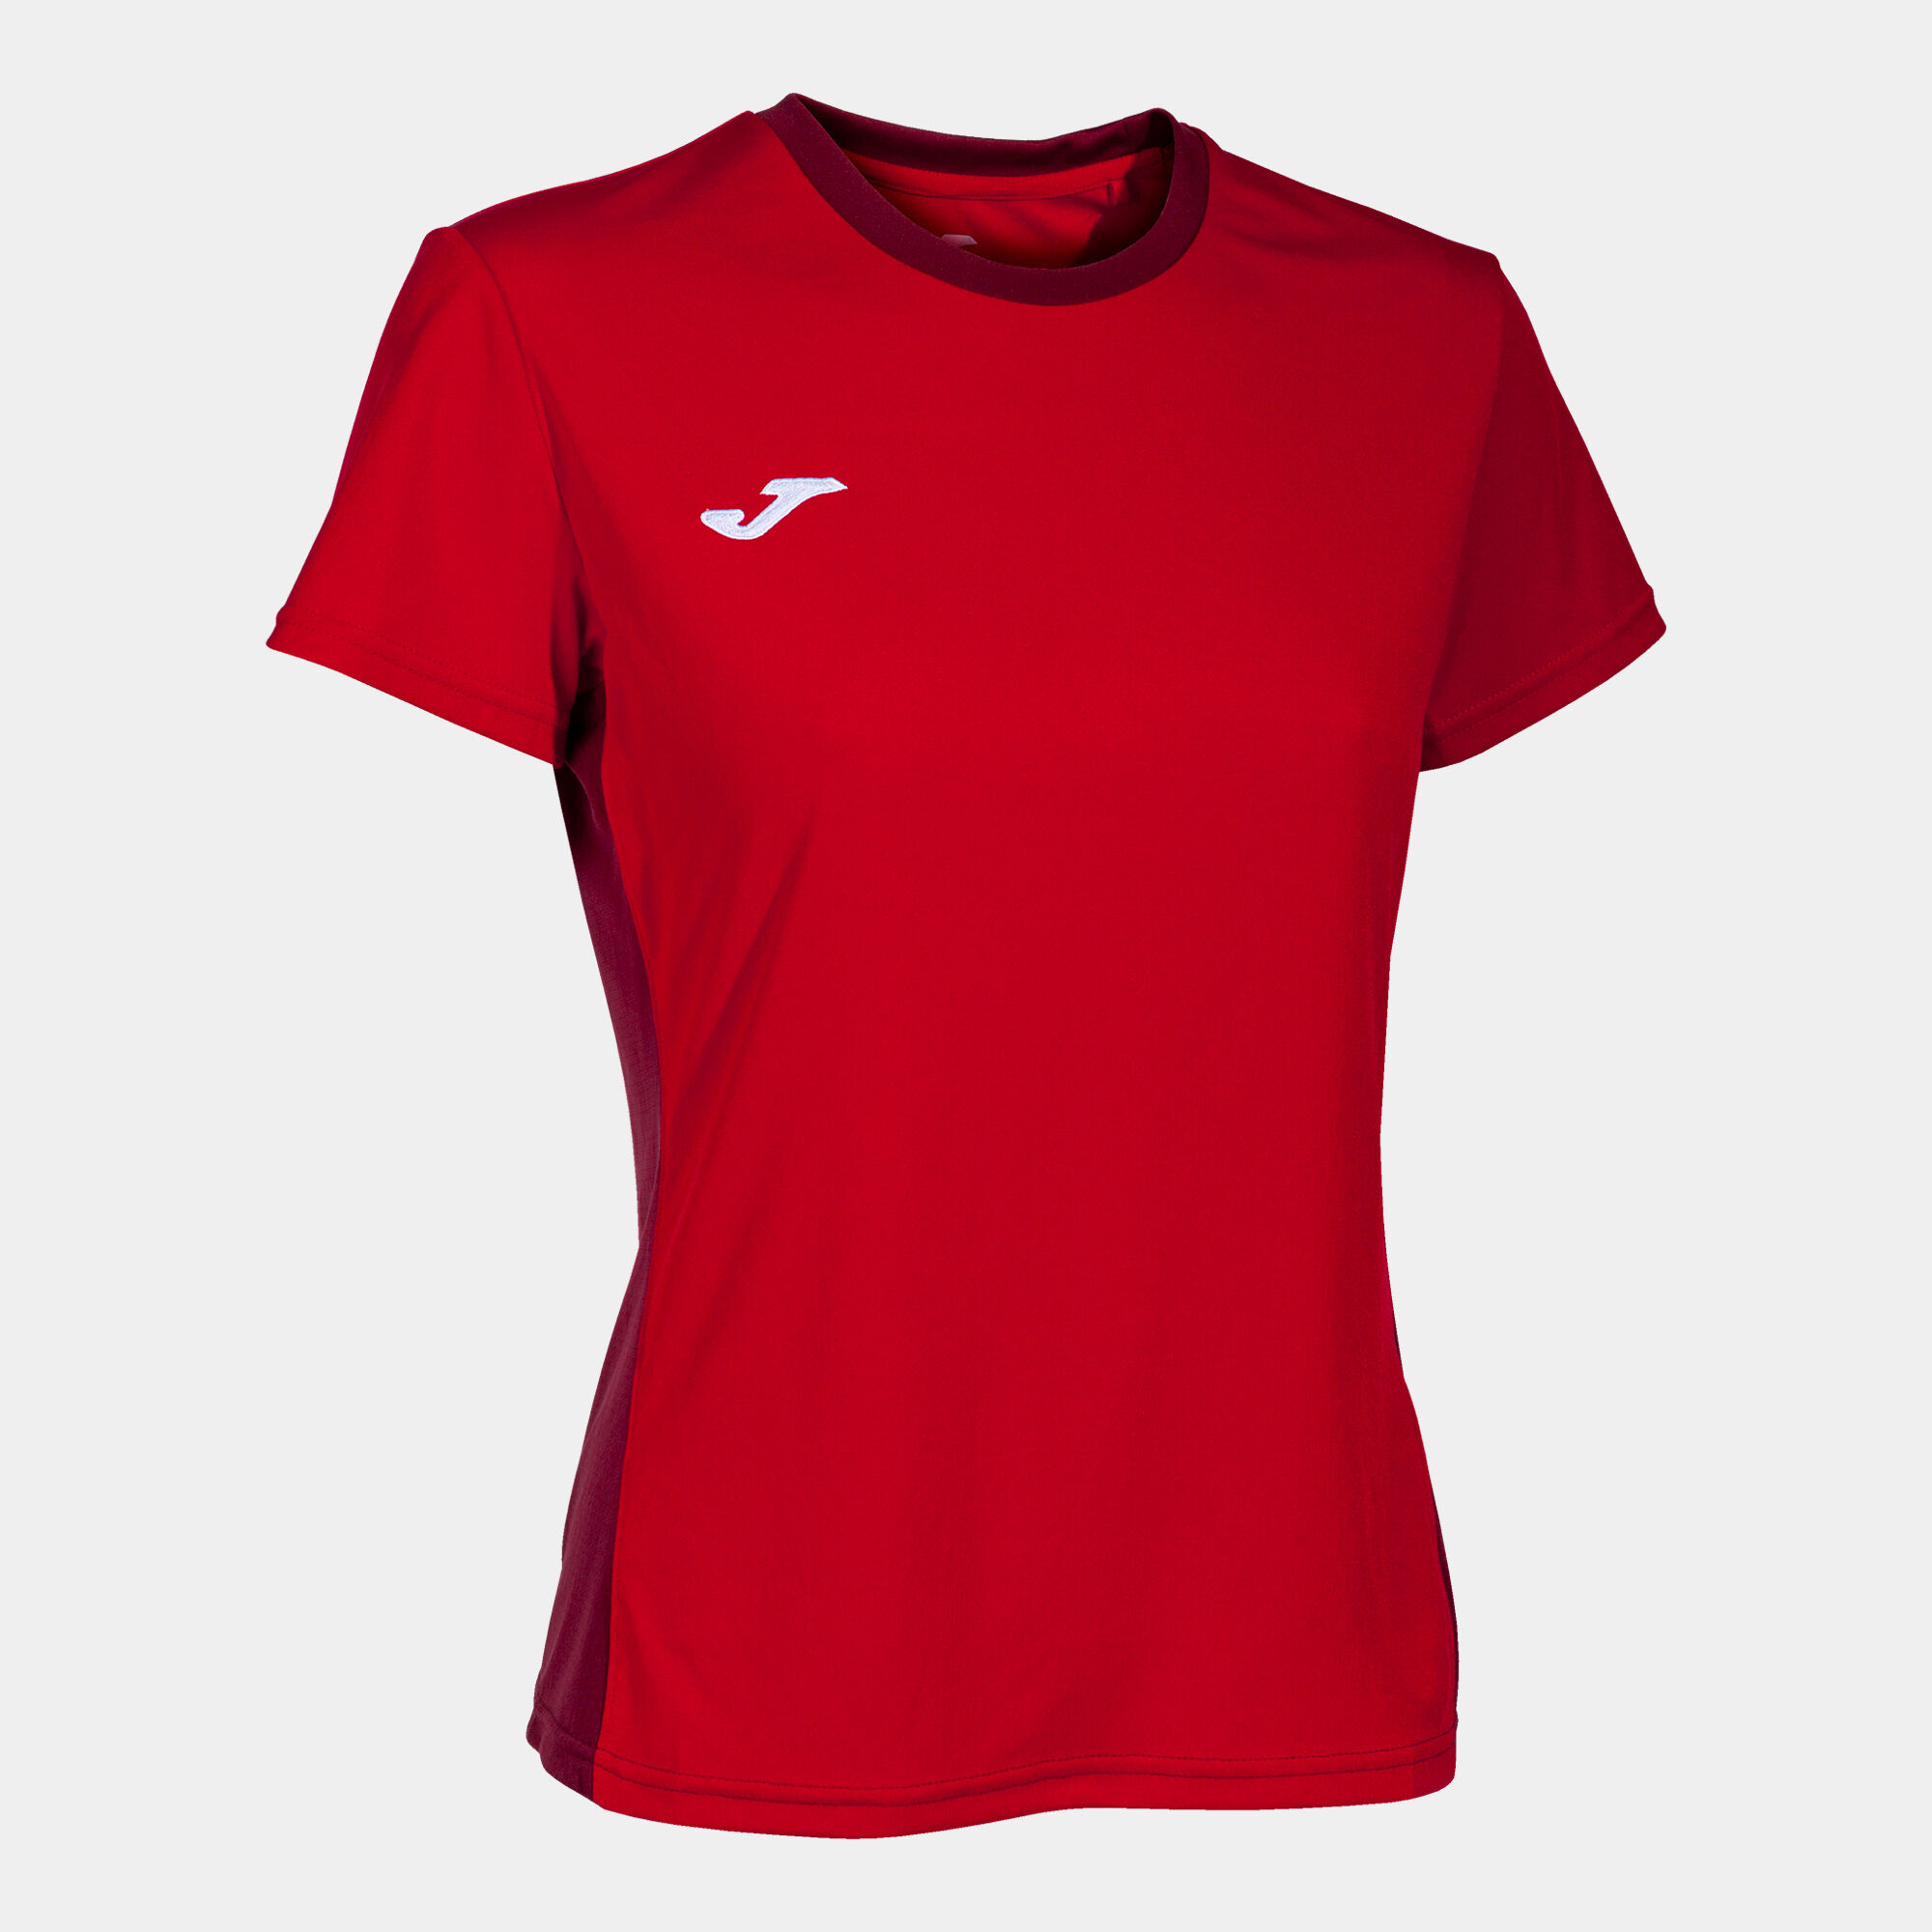 MAILLOT MANCHES COURTES FEMME WINNER II ROUGE